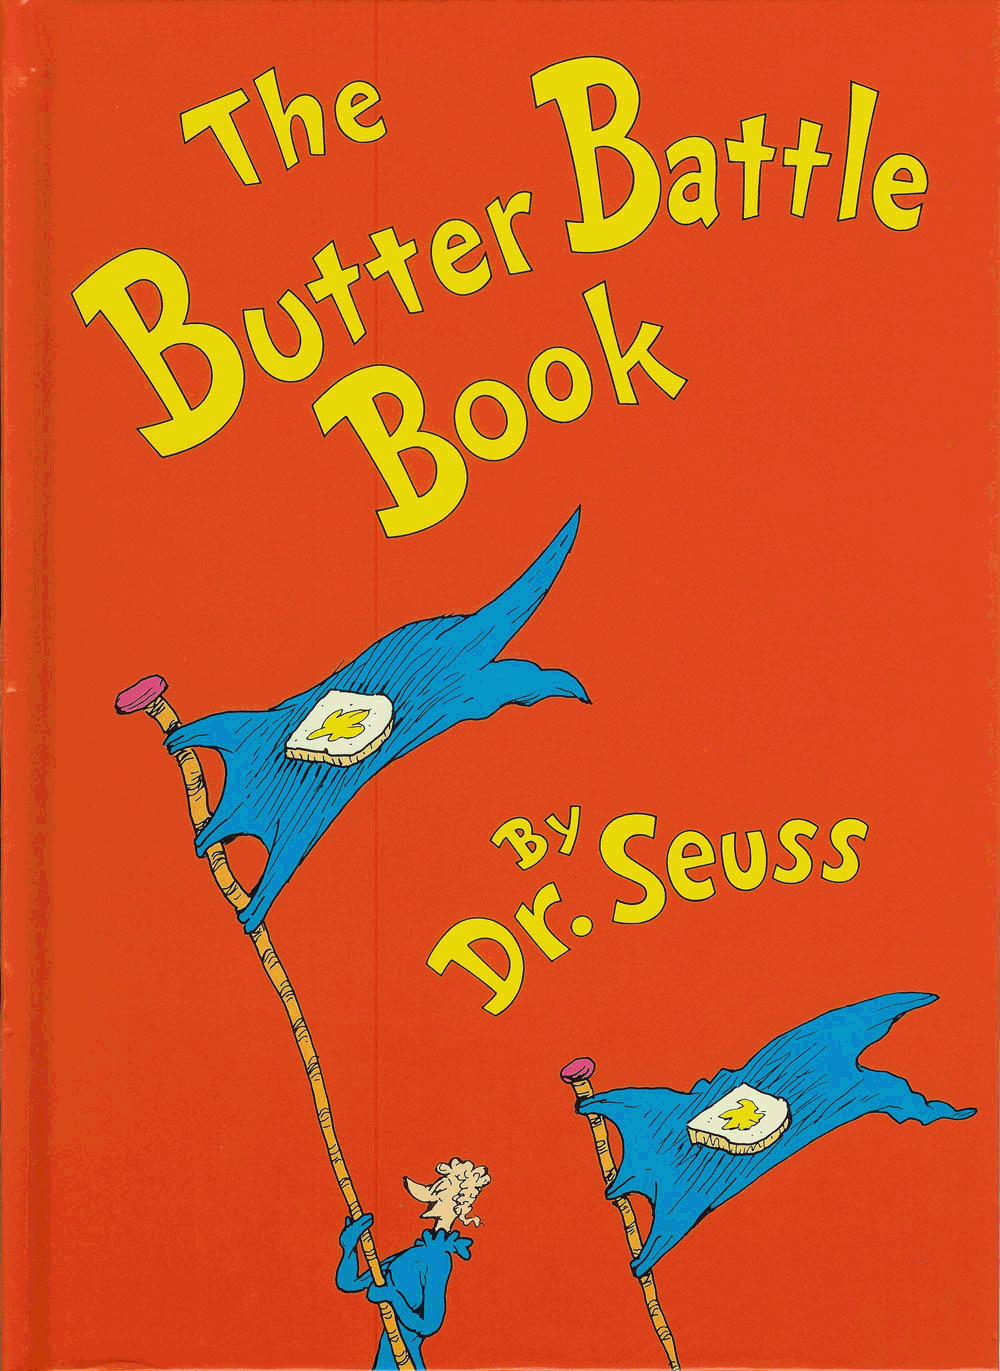 the butter battle book pdf download